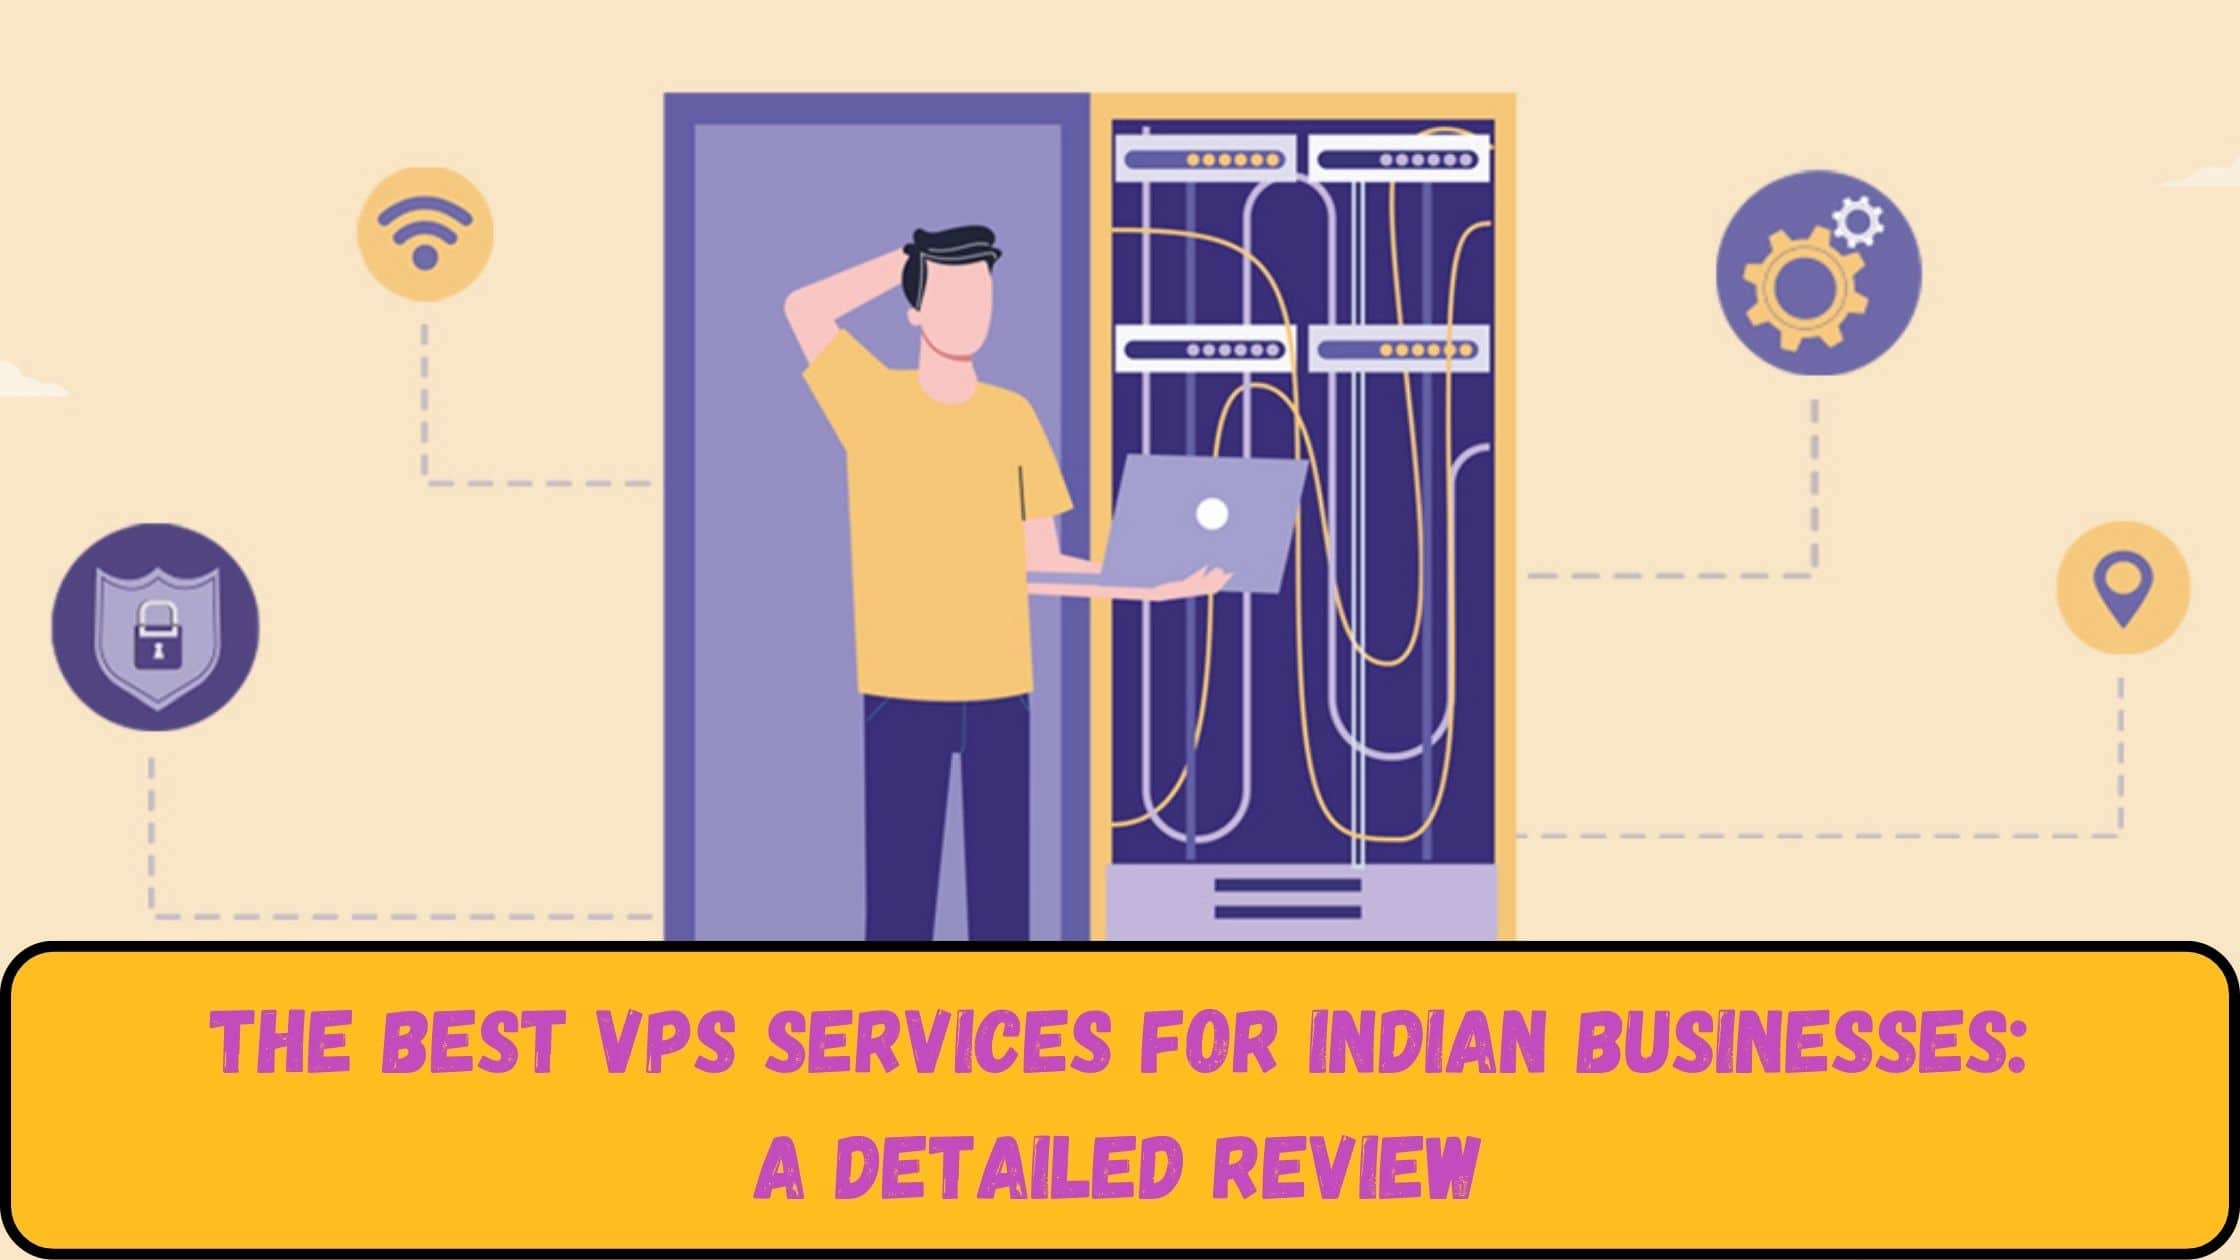 The Best VPS Services for Indian Businesses A Detailed Review